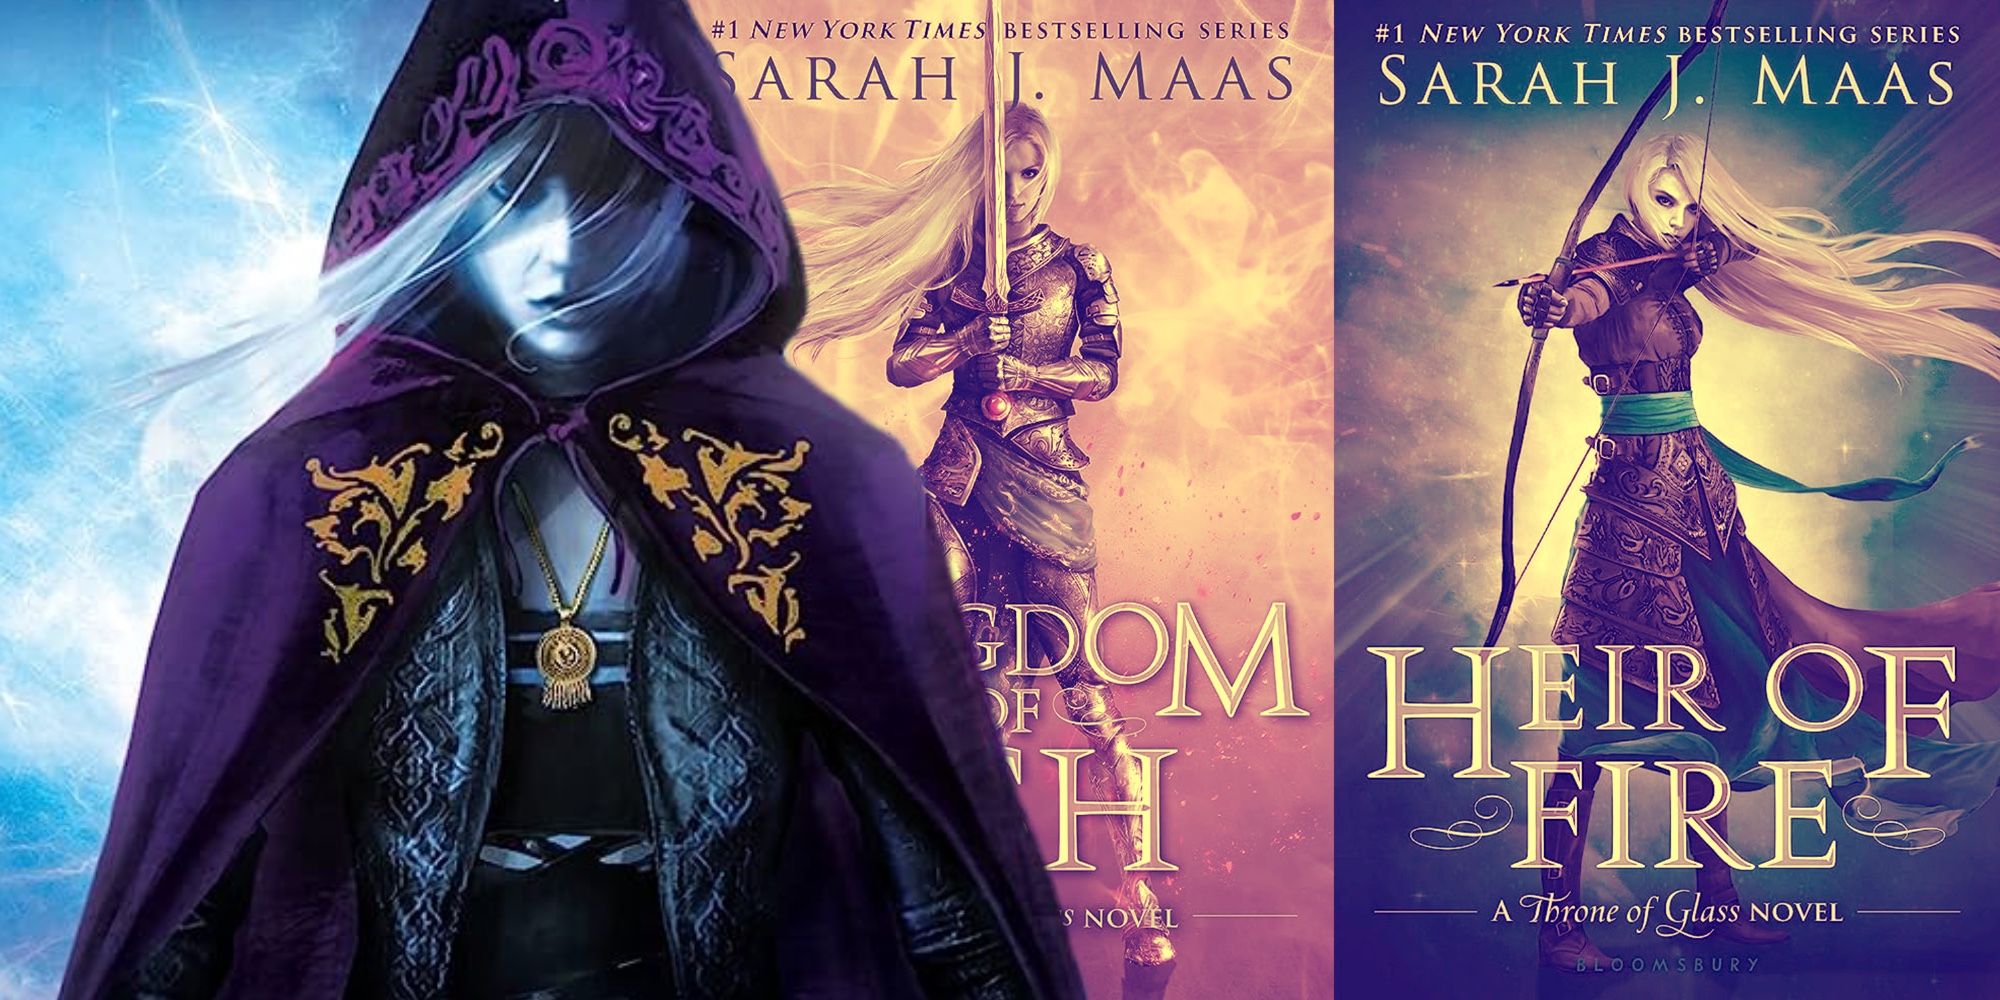 A composite image of Celaena from the Throne of Glass series with book covers 